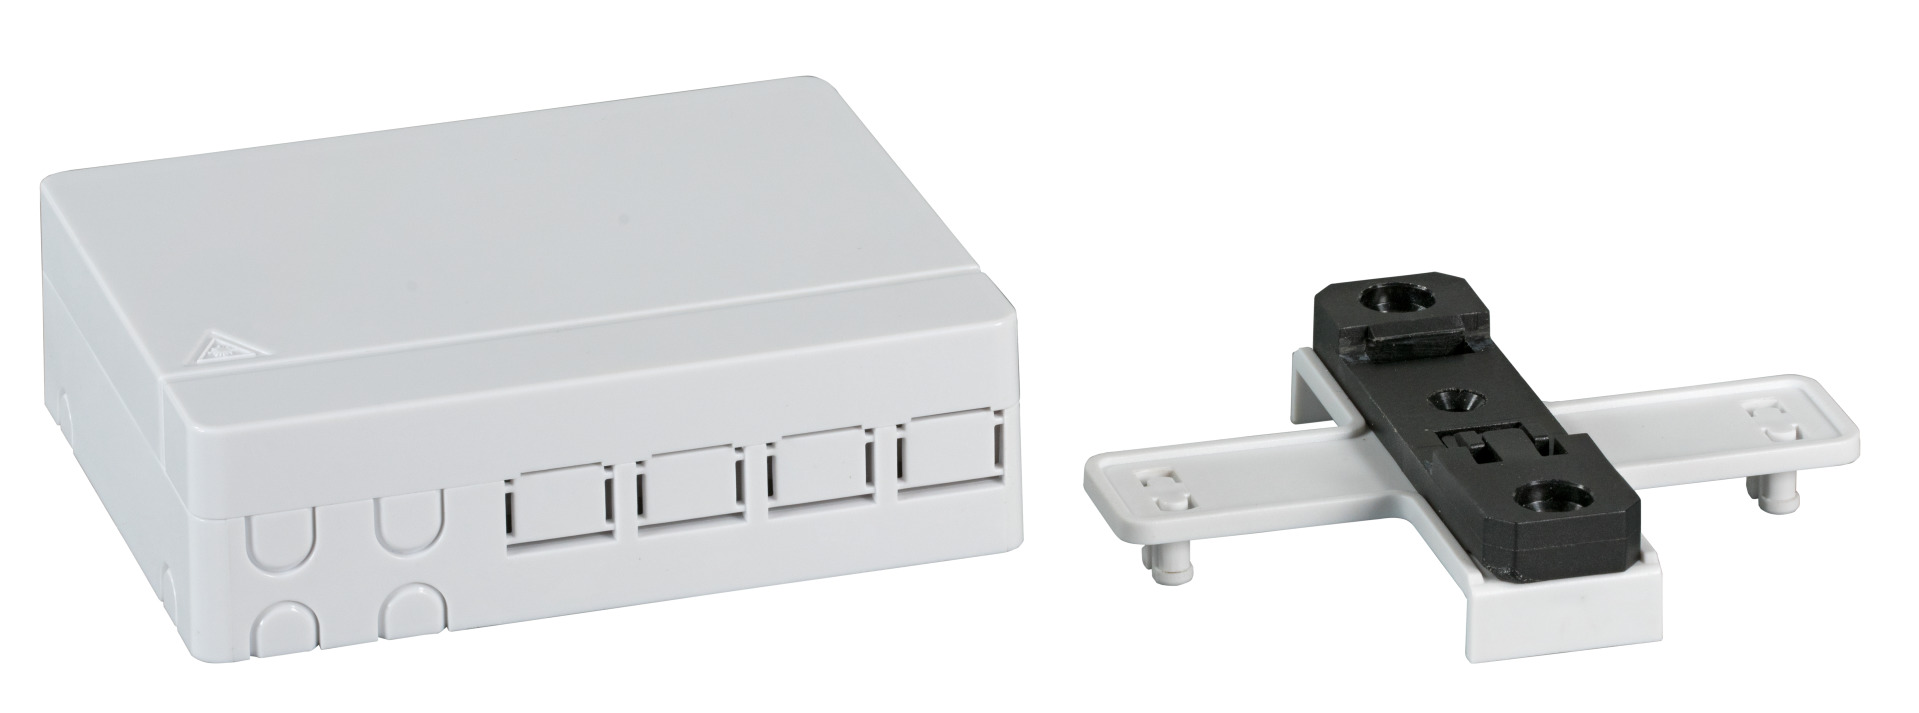 FTTH Indoor DIN RAIL Box for 4fiber, 4adapter and Fiber overlength box